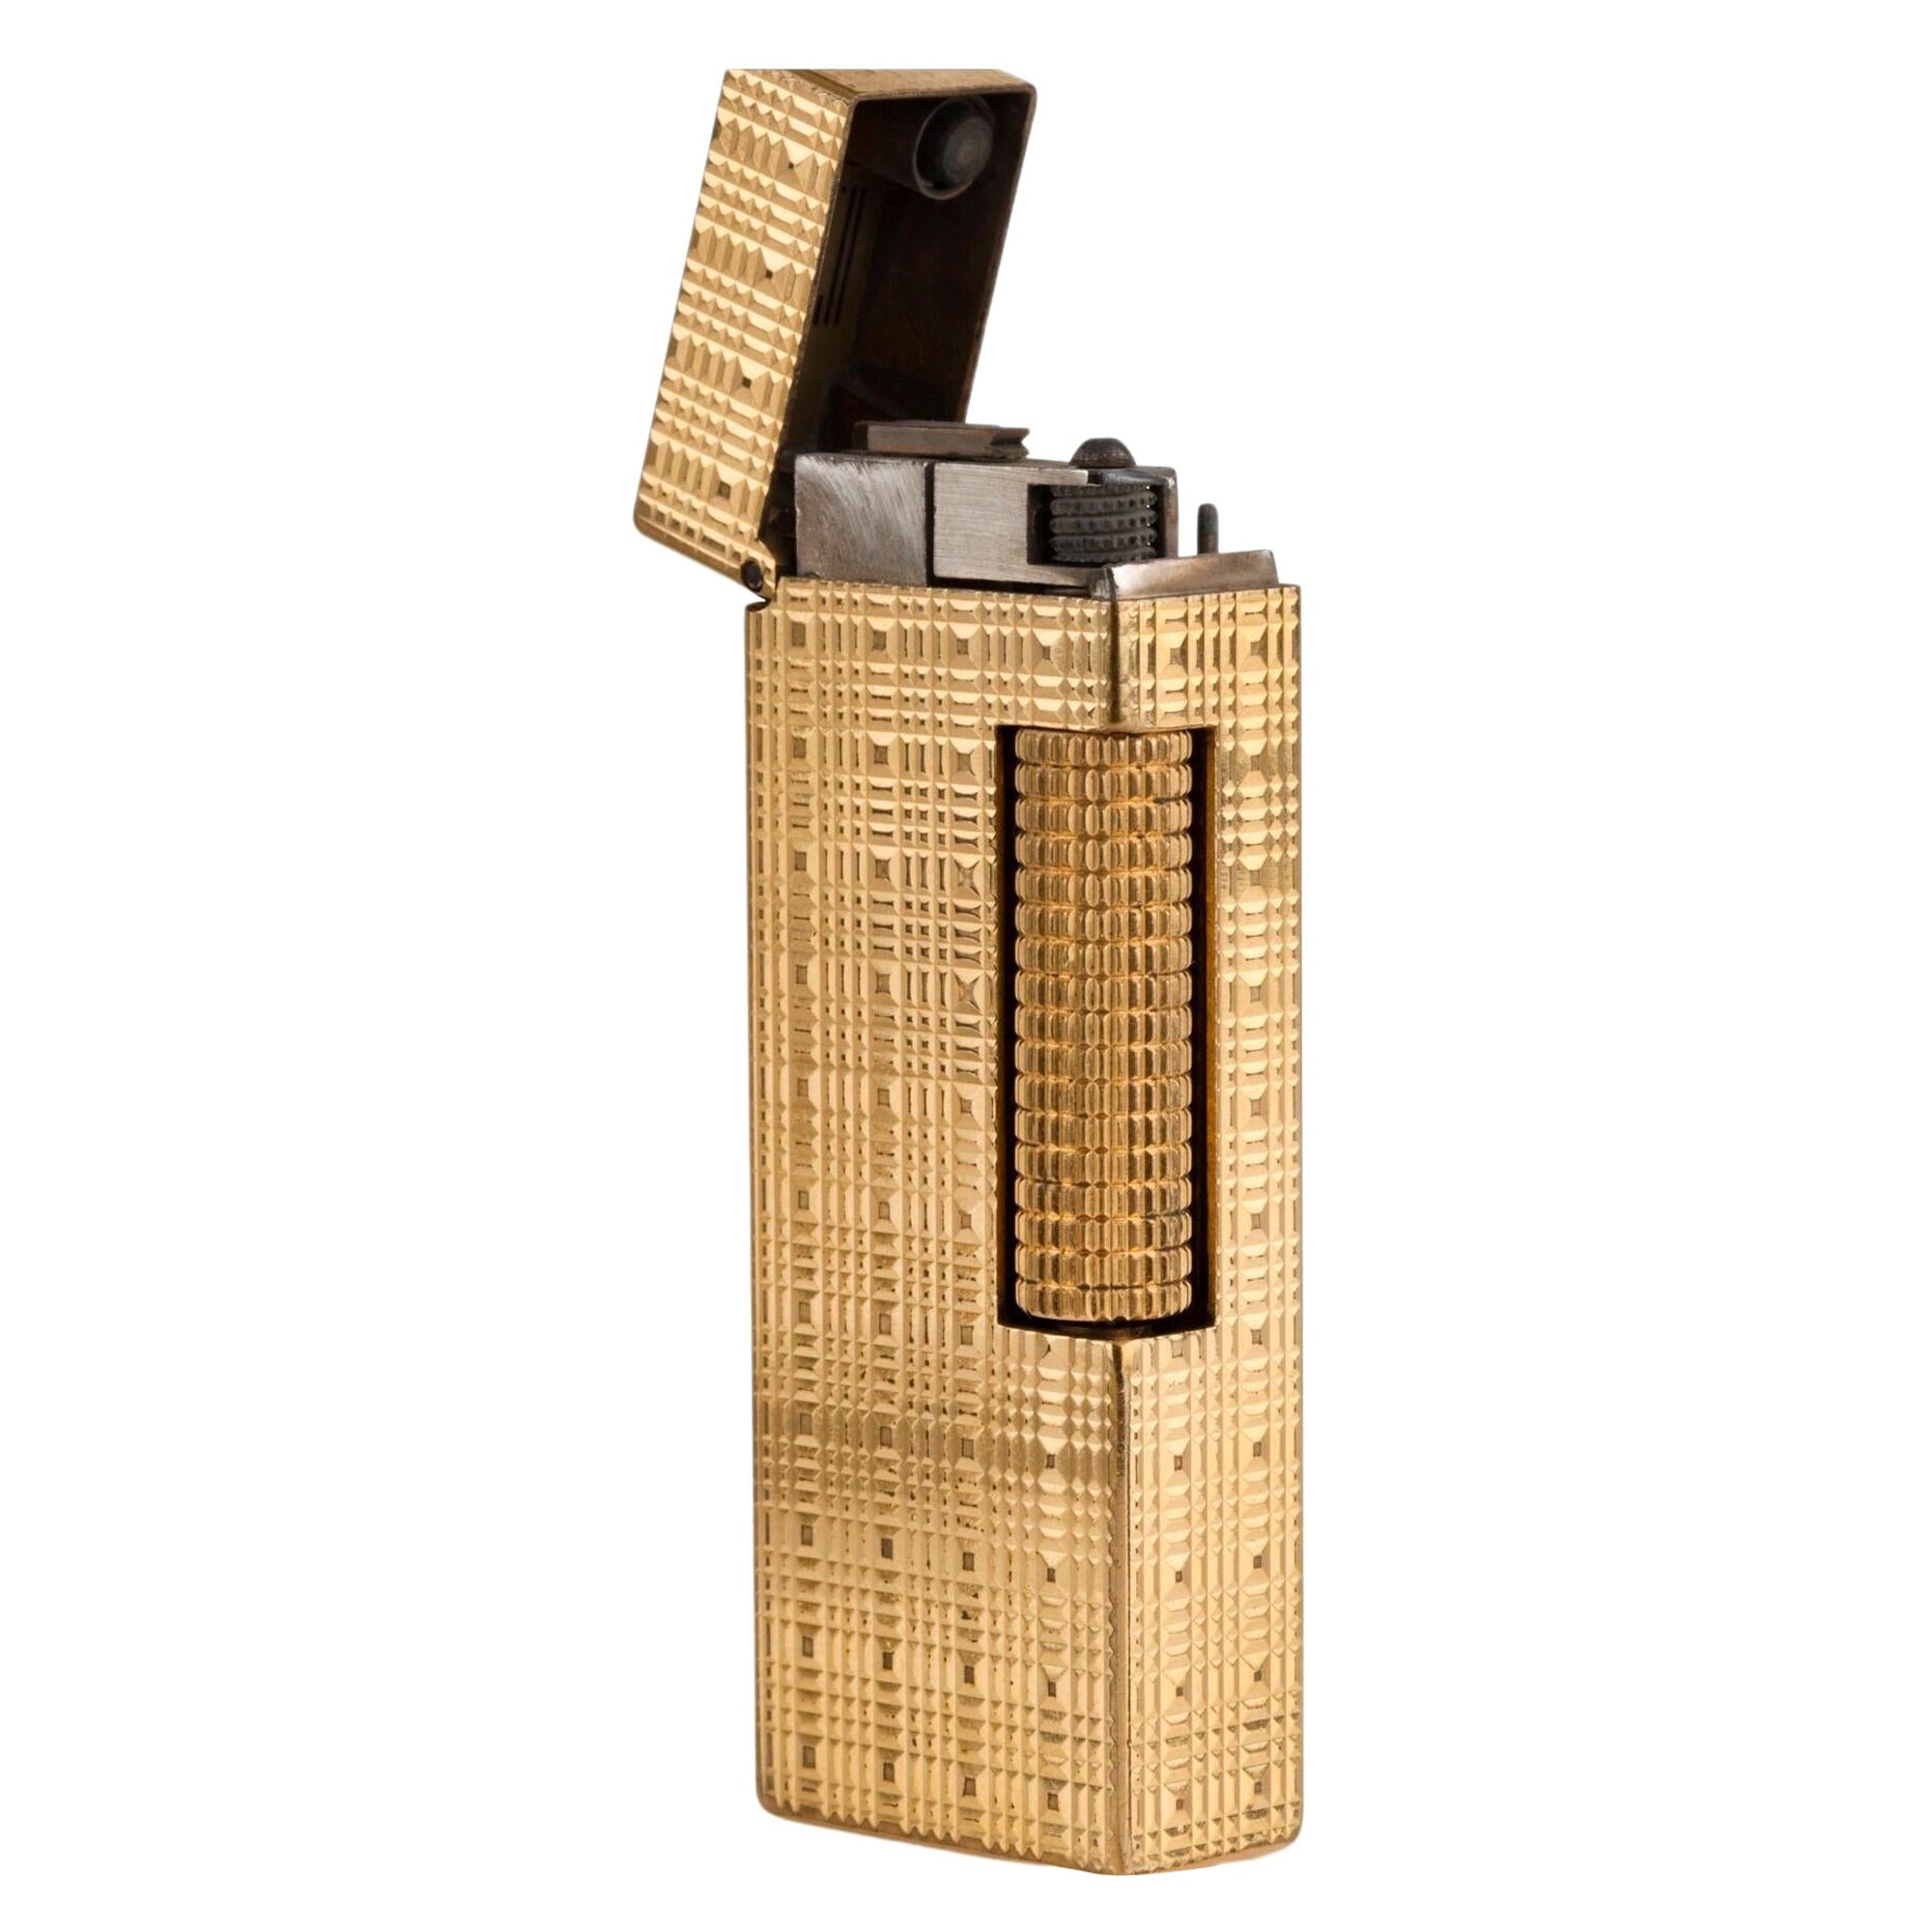 Iconic Dunhill Gold-Plated Cigarette Lighter with Original Red Lather Case For Sale